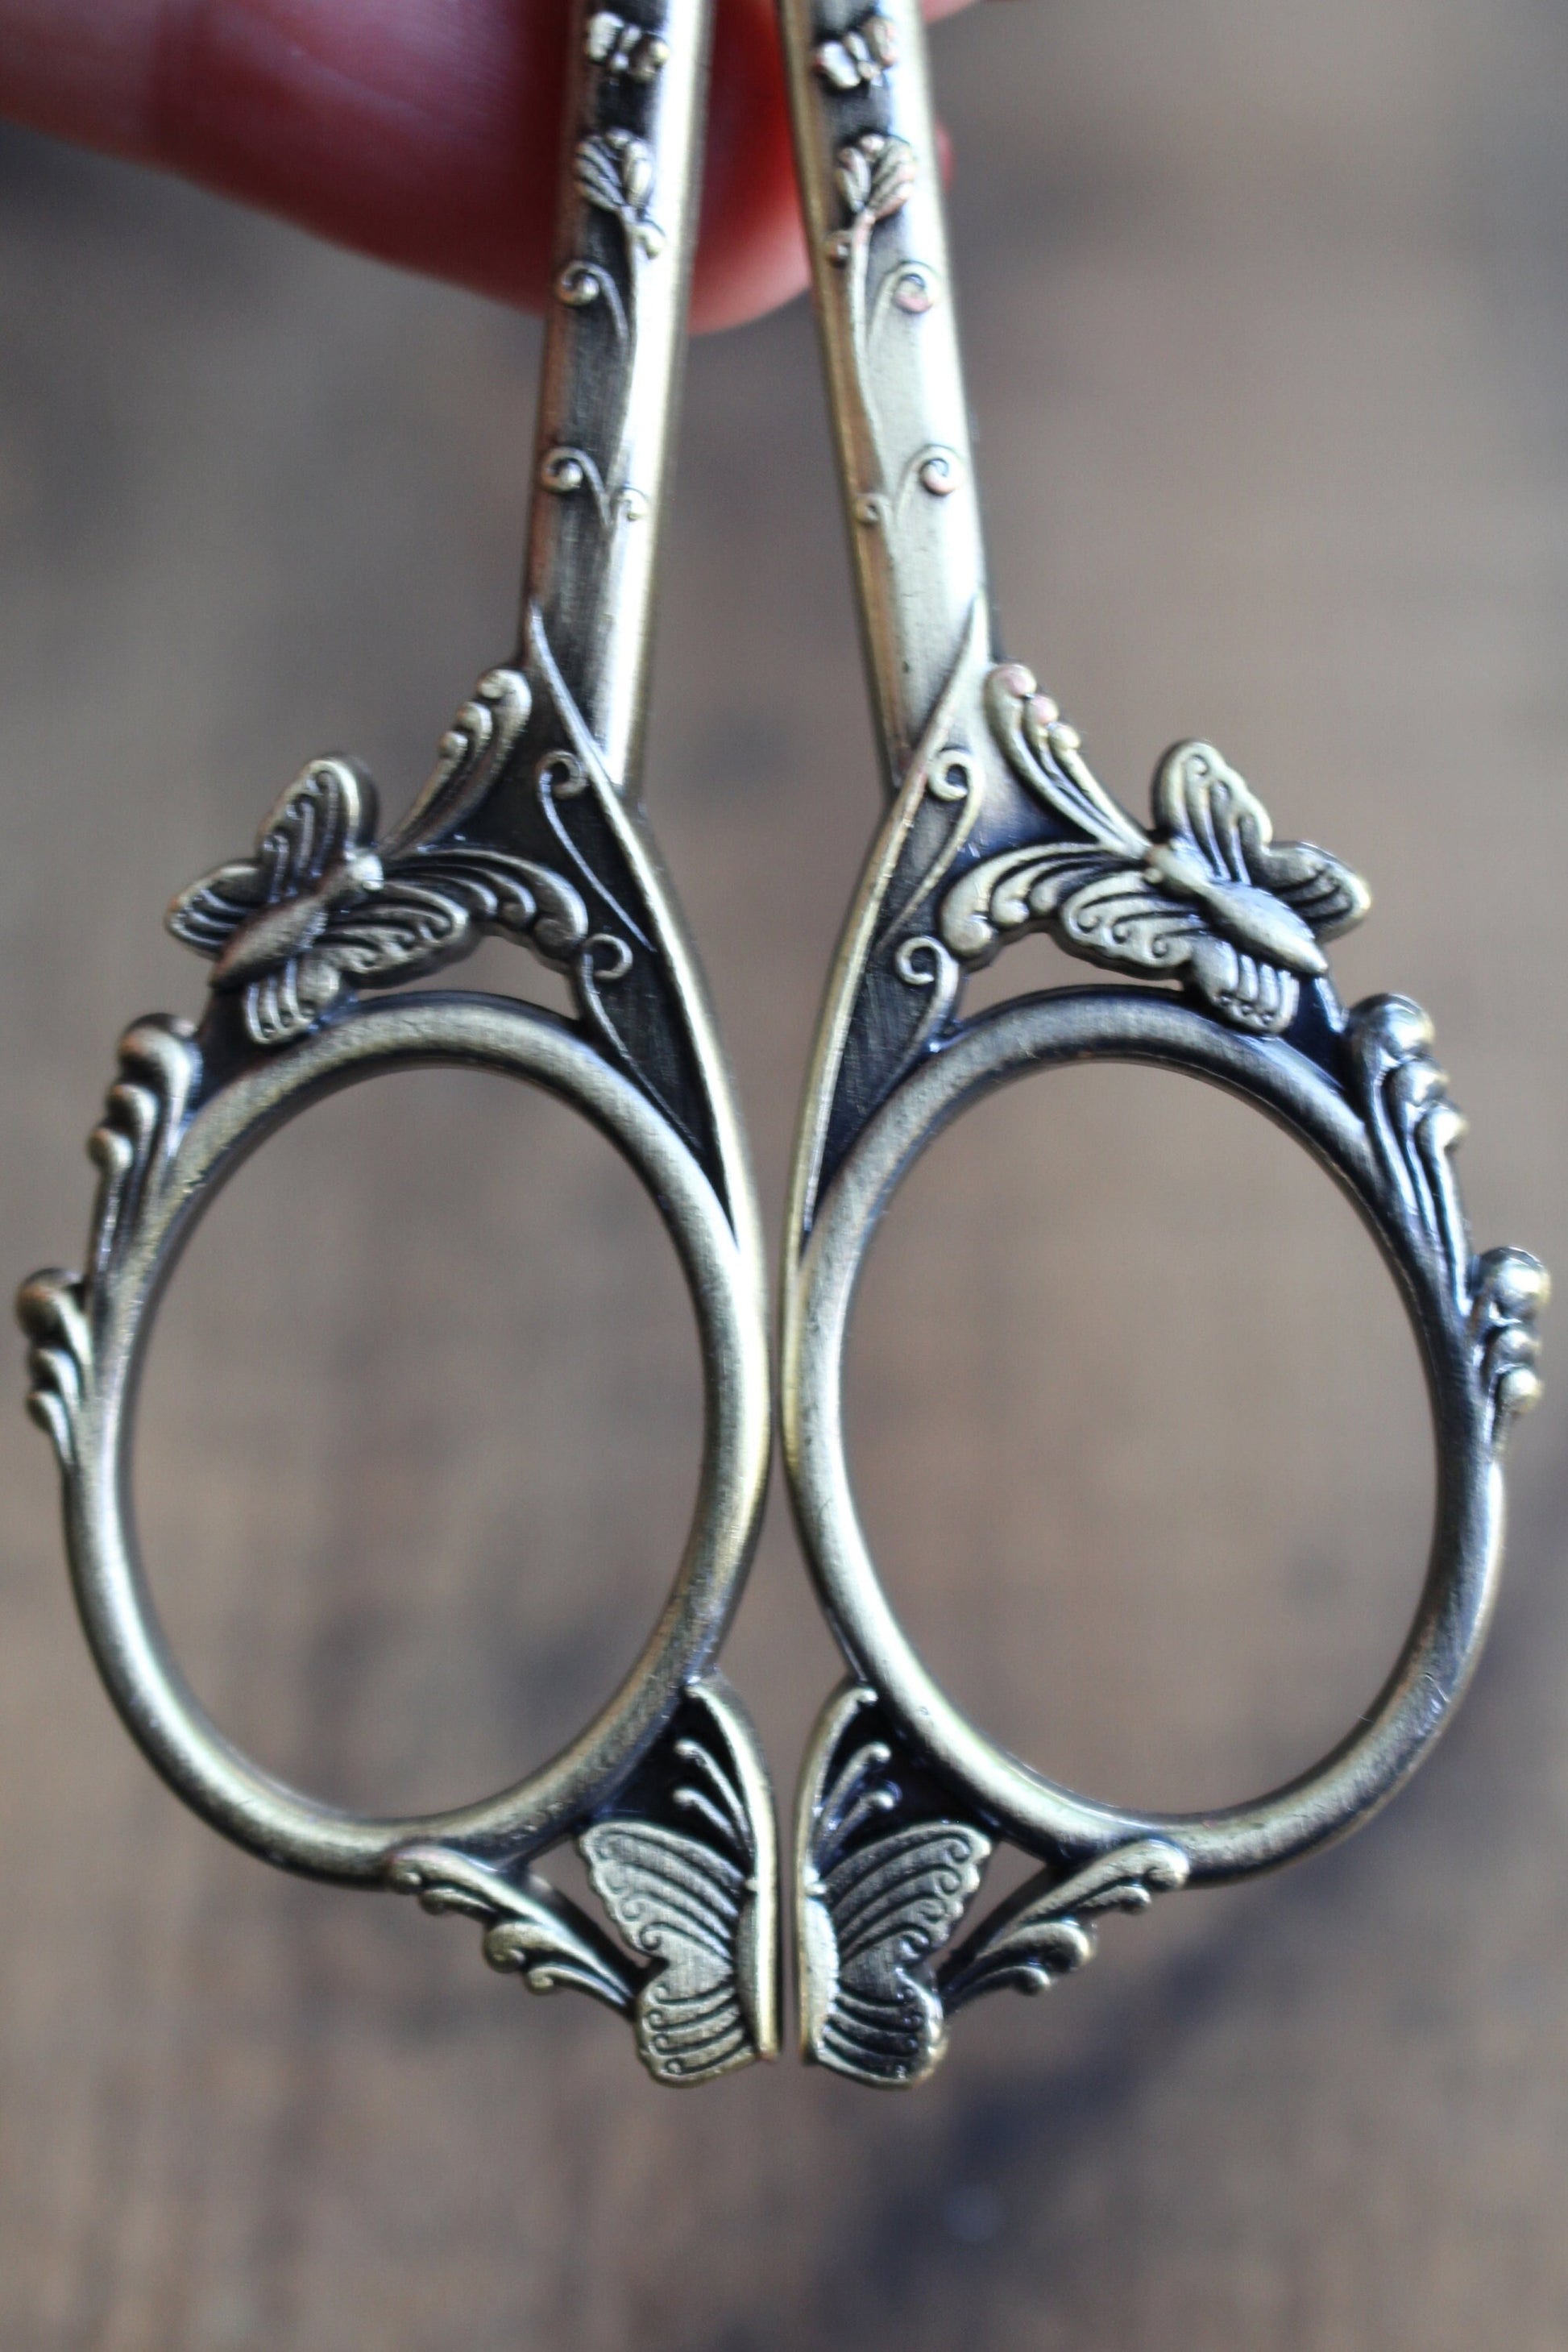 Butterfly embroidery scissors in antique gold